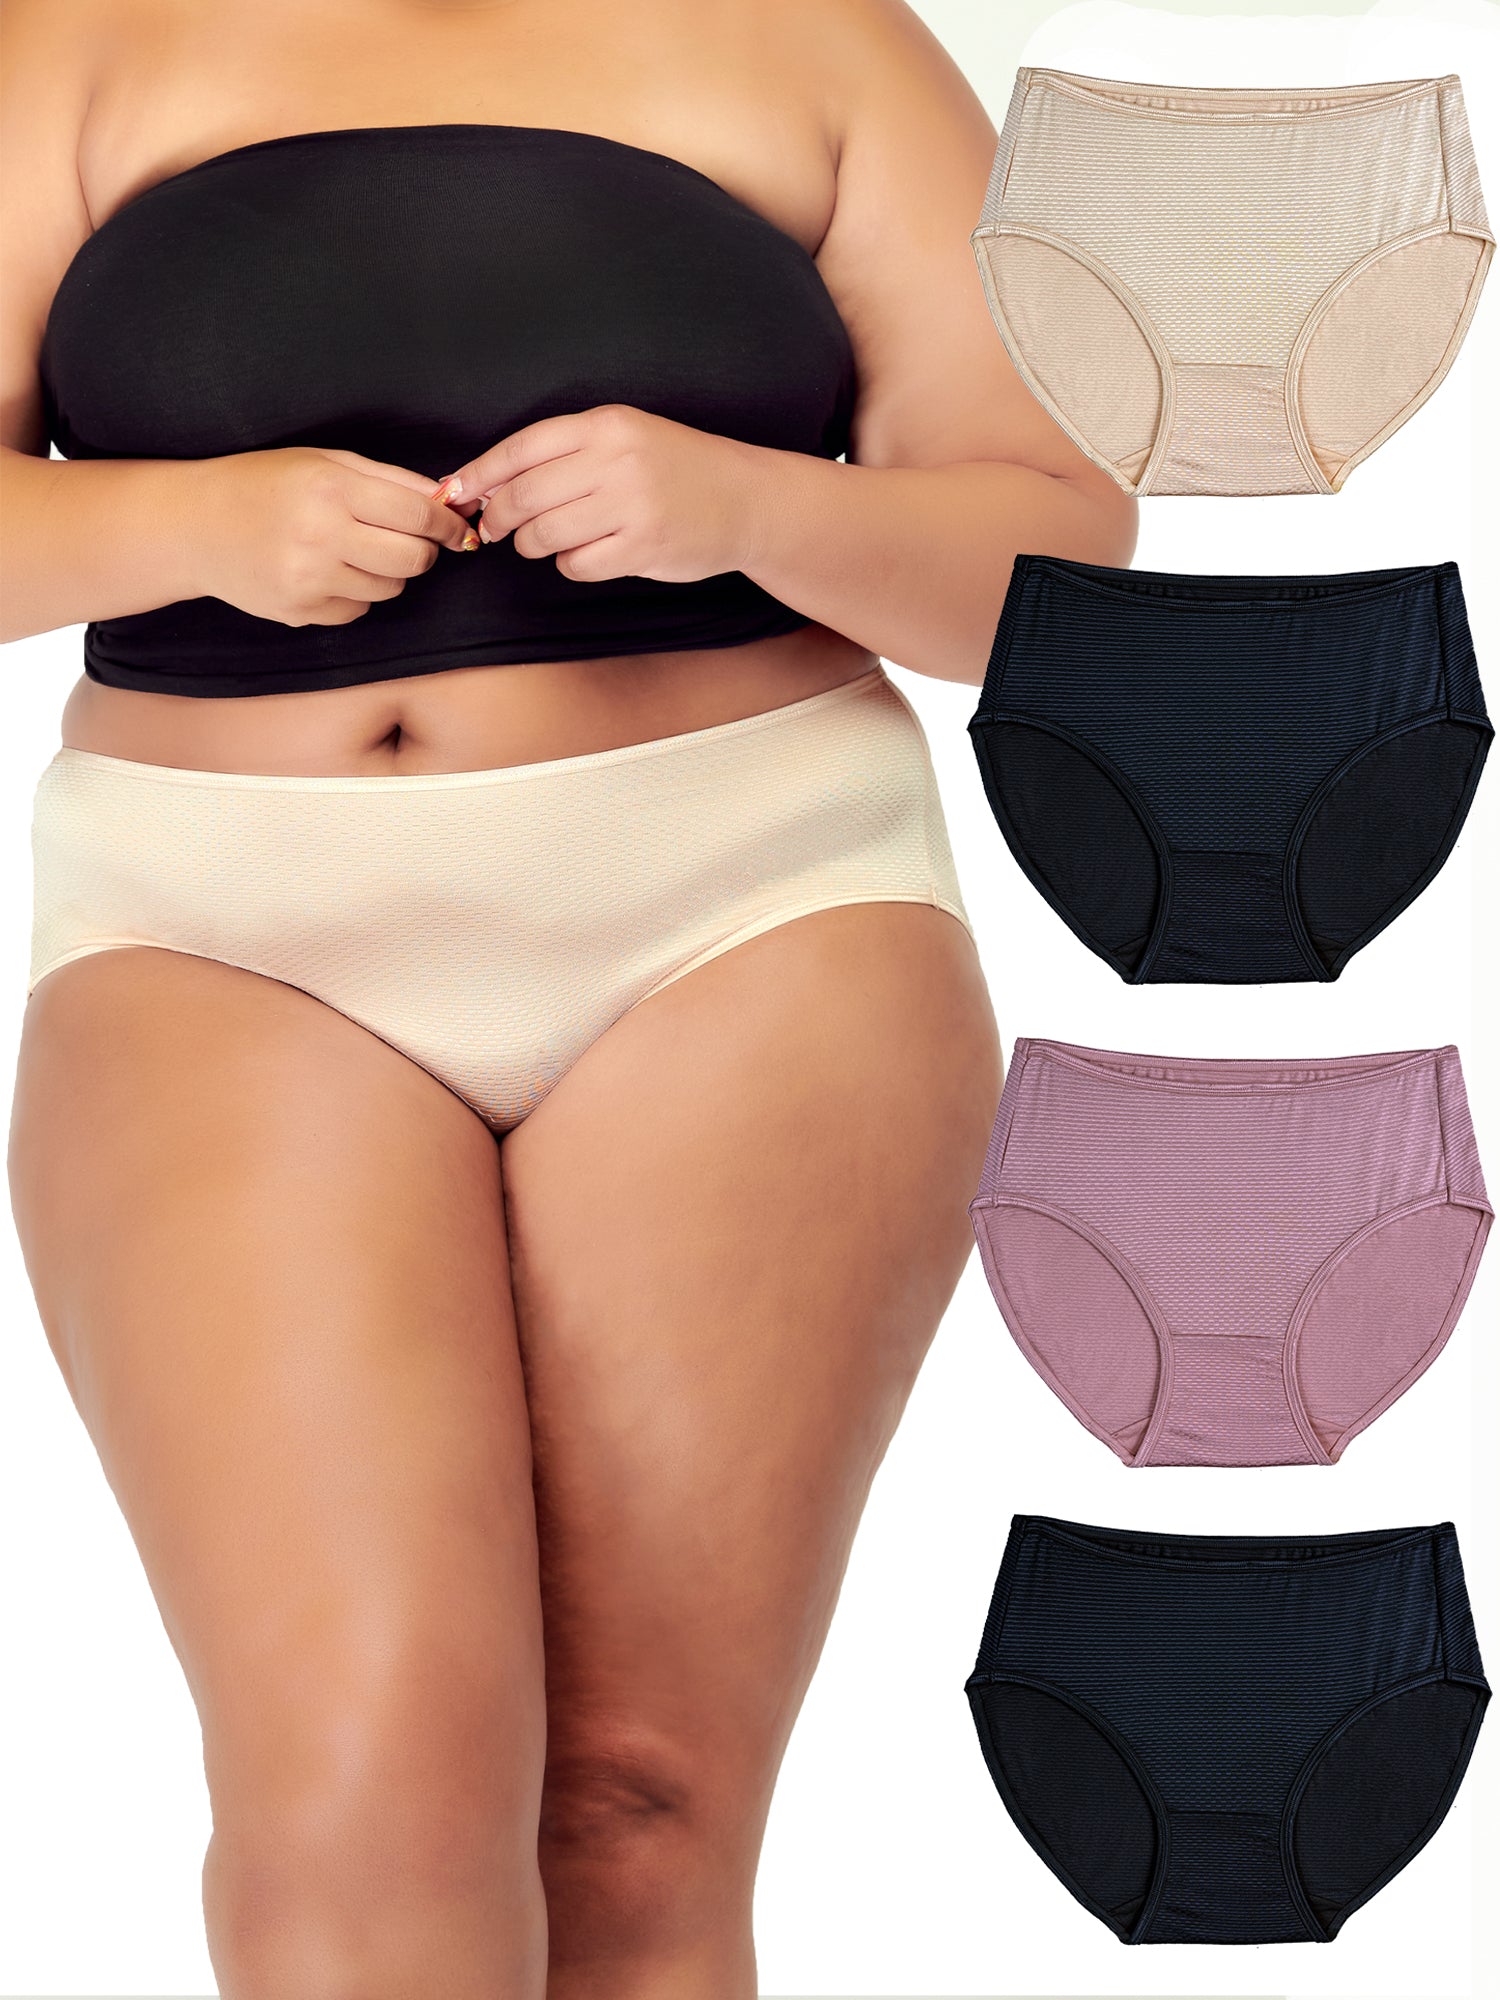 Cotton Underwear for Women Breathable, Soft, Stretchy Briefs Panties  Regular & Plus Size Multipack (Small) Basic at  Women's Clothing store